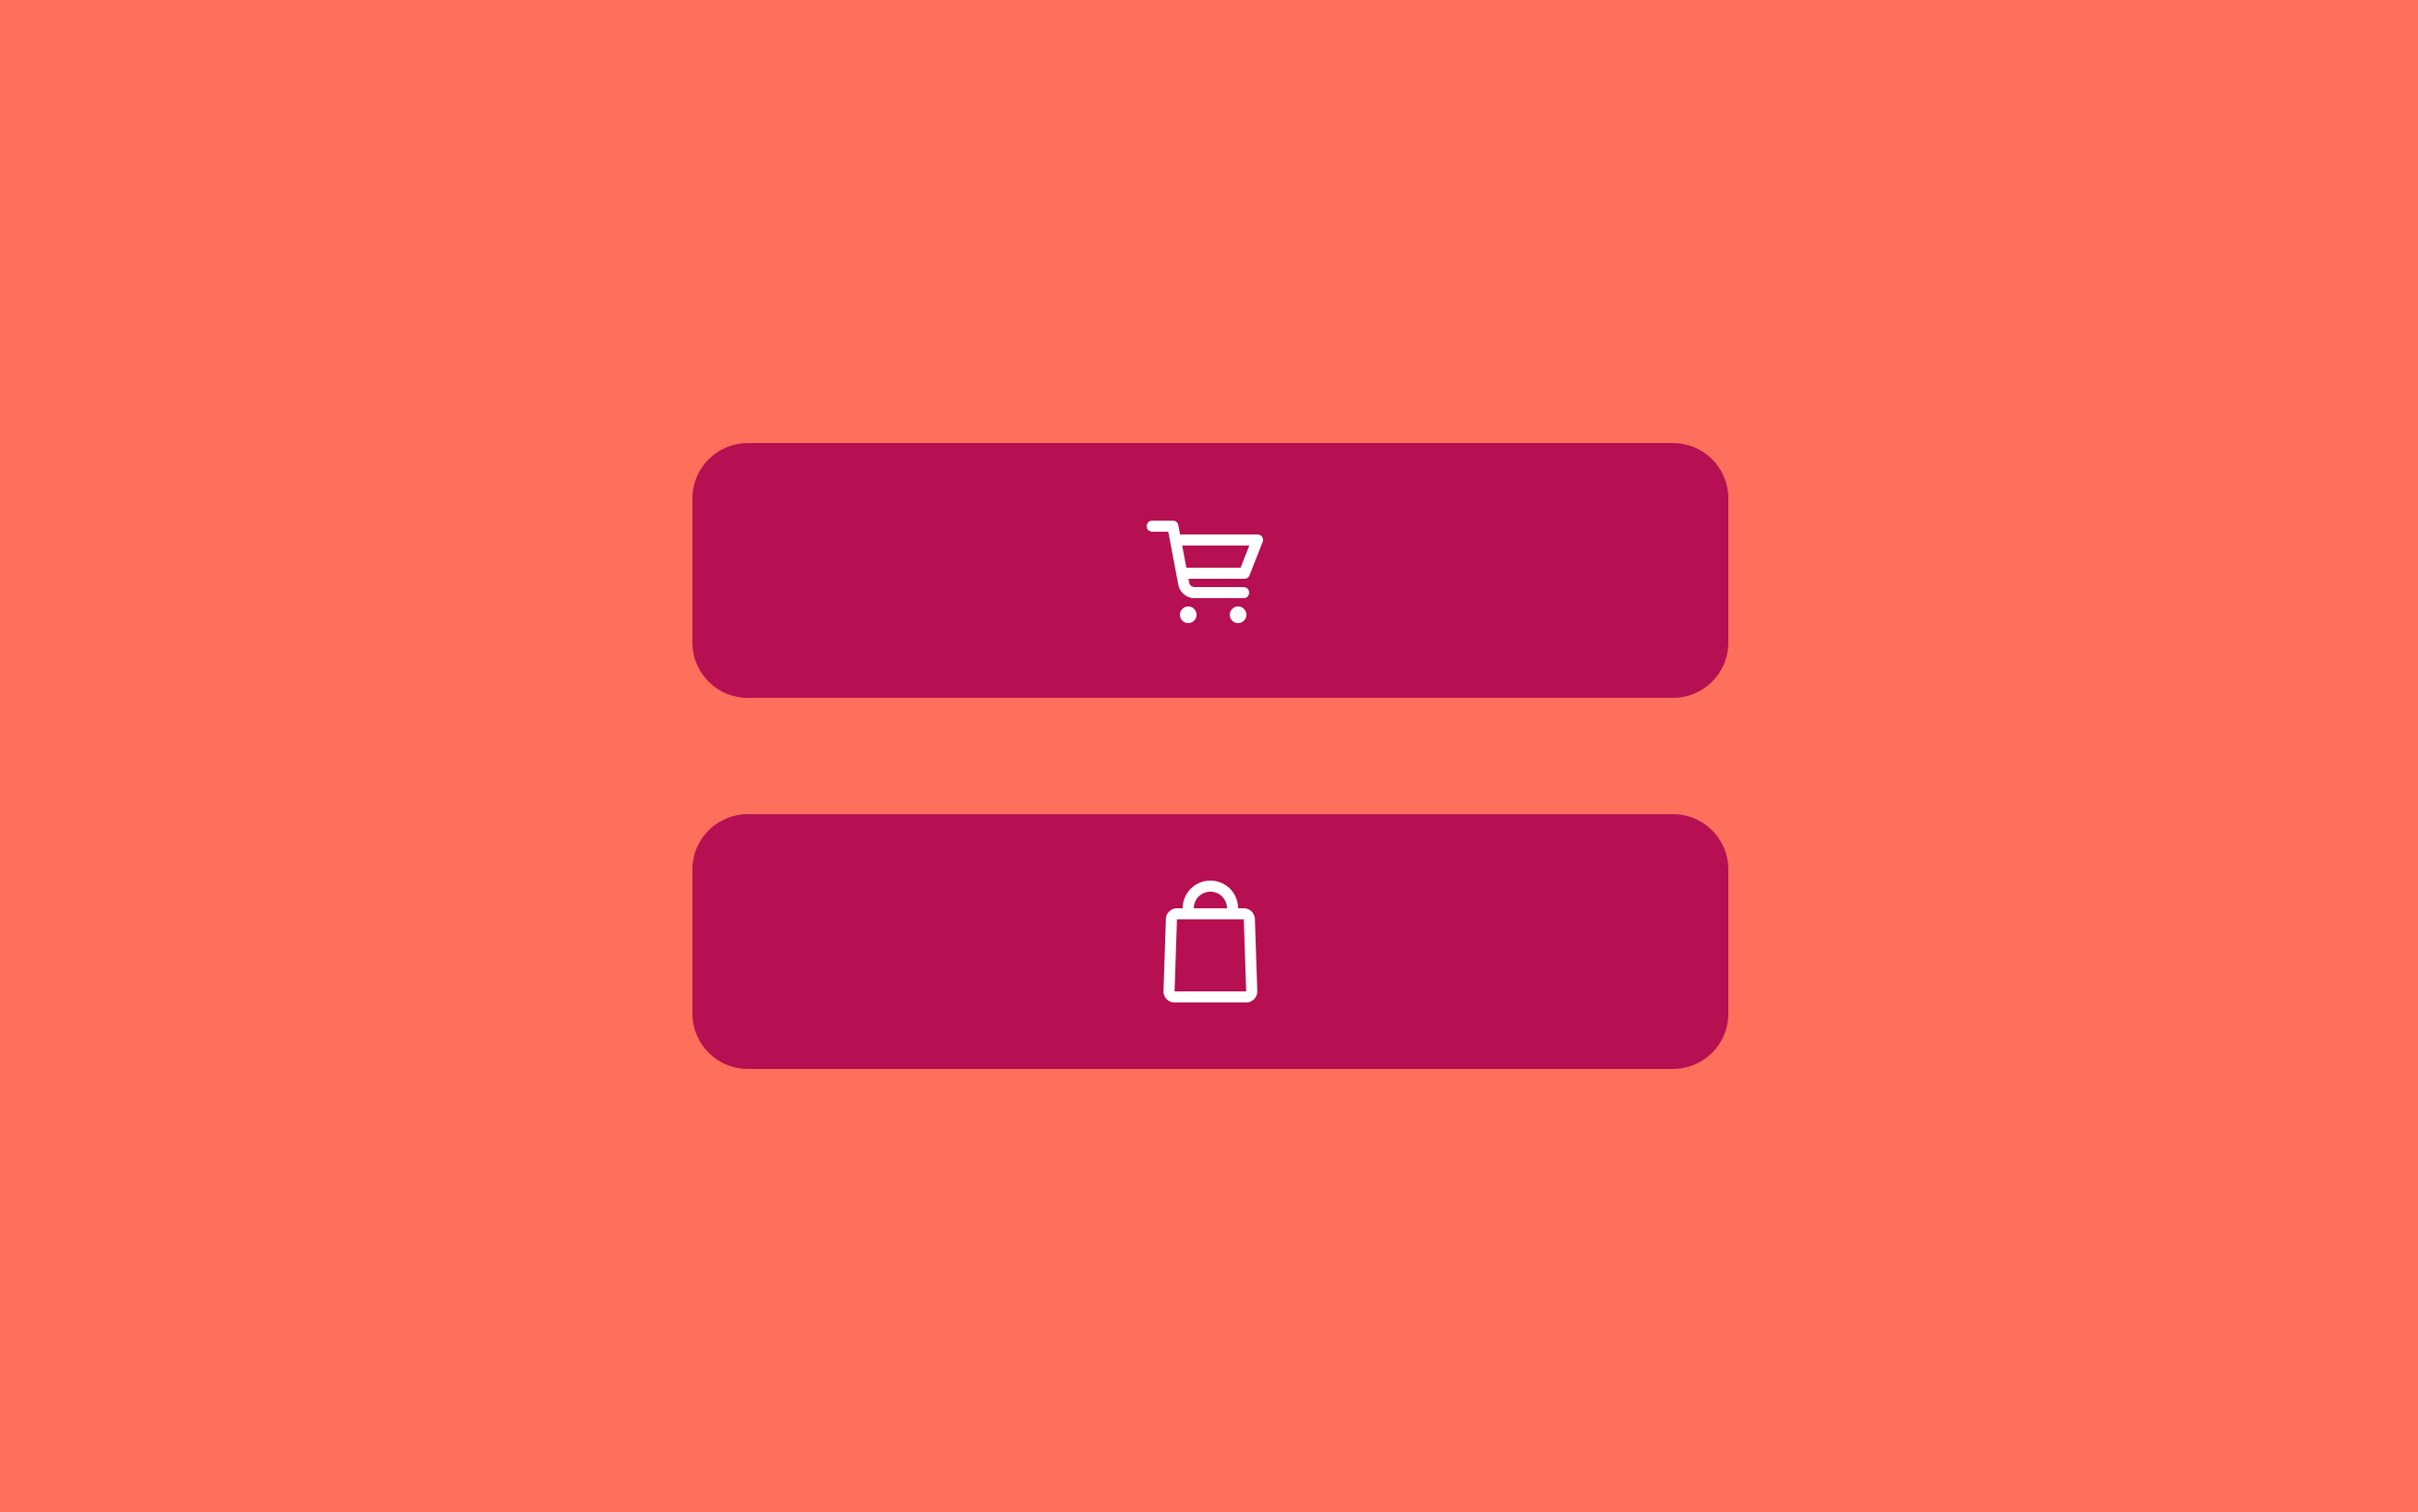 Increase conversion rates with the “Add to cart” and “Buy now” buttons